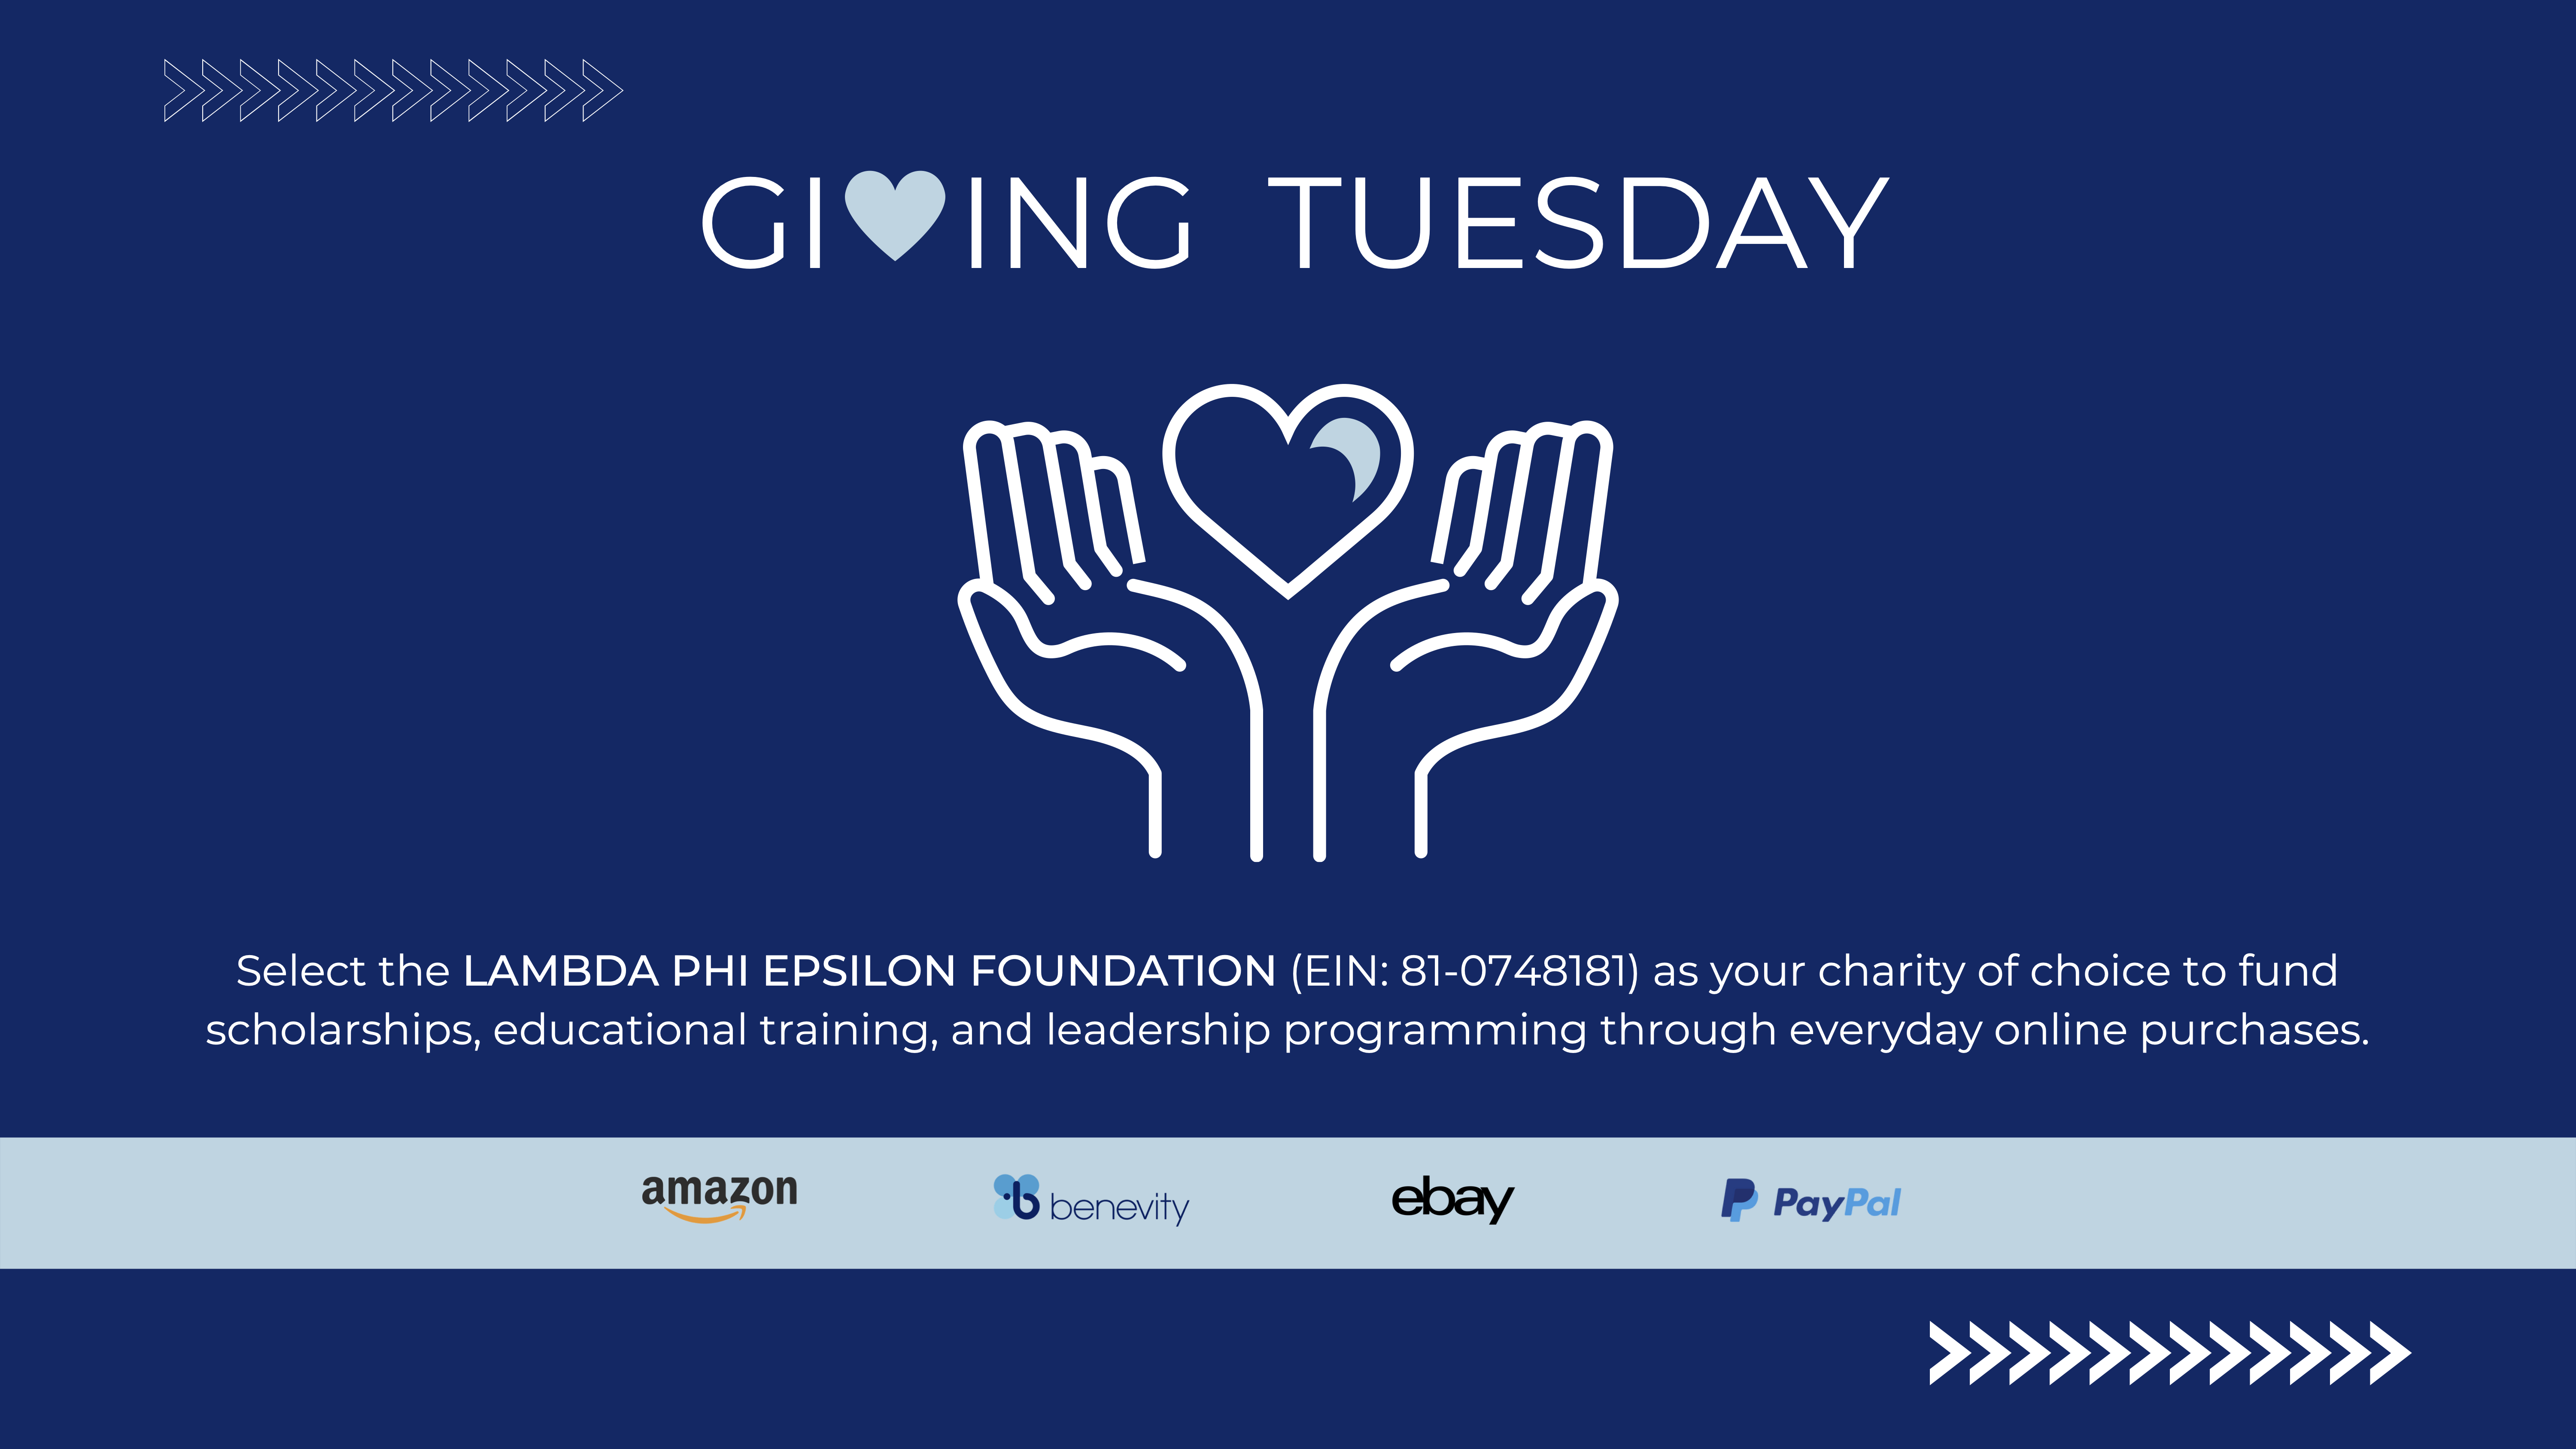 This Giving Tuesday, support the LFE Foundation (established in Indianapolis, IN) as your charity of choice this holiday season! Donate today across online retailers and participating corporate employers.